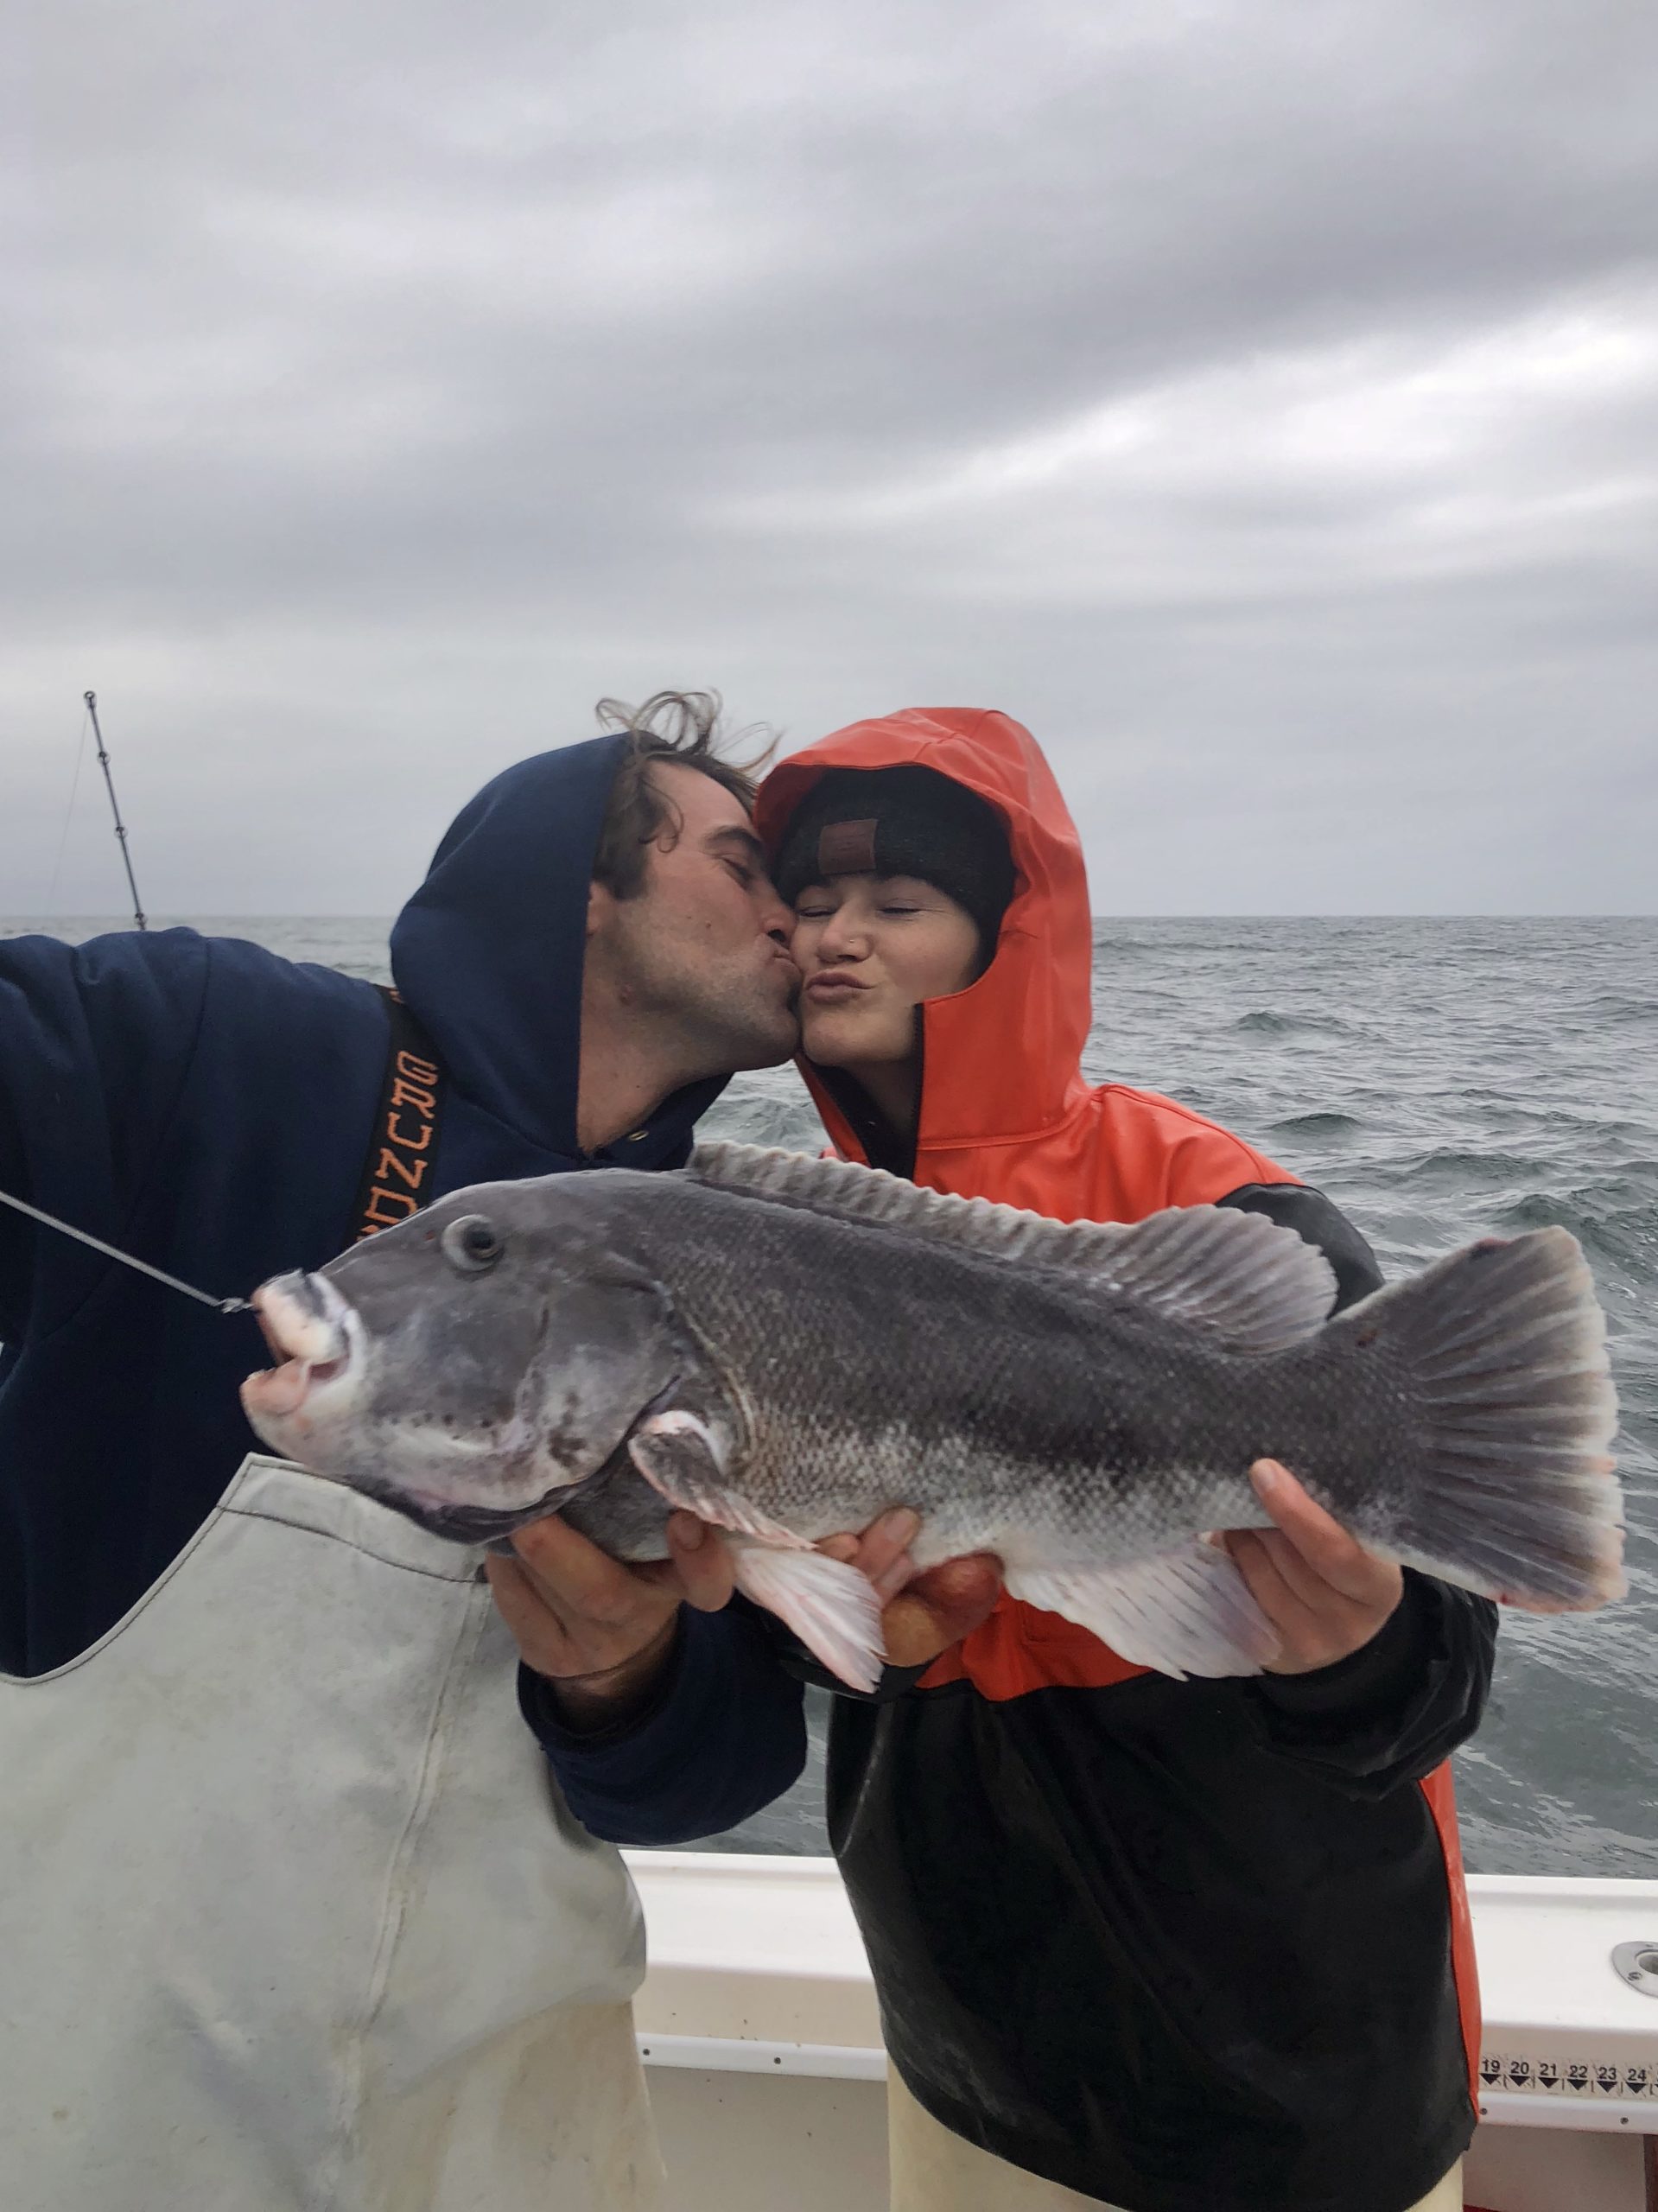 Mark Semkus was mighty proud of his girlfriend Caroline Whelan for catching this nice blackfish recently.